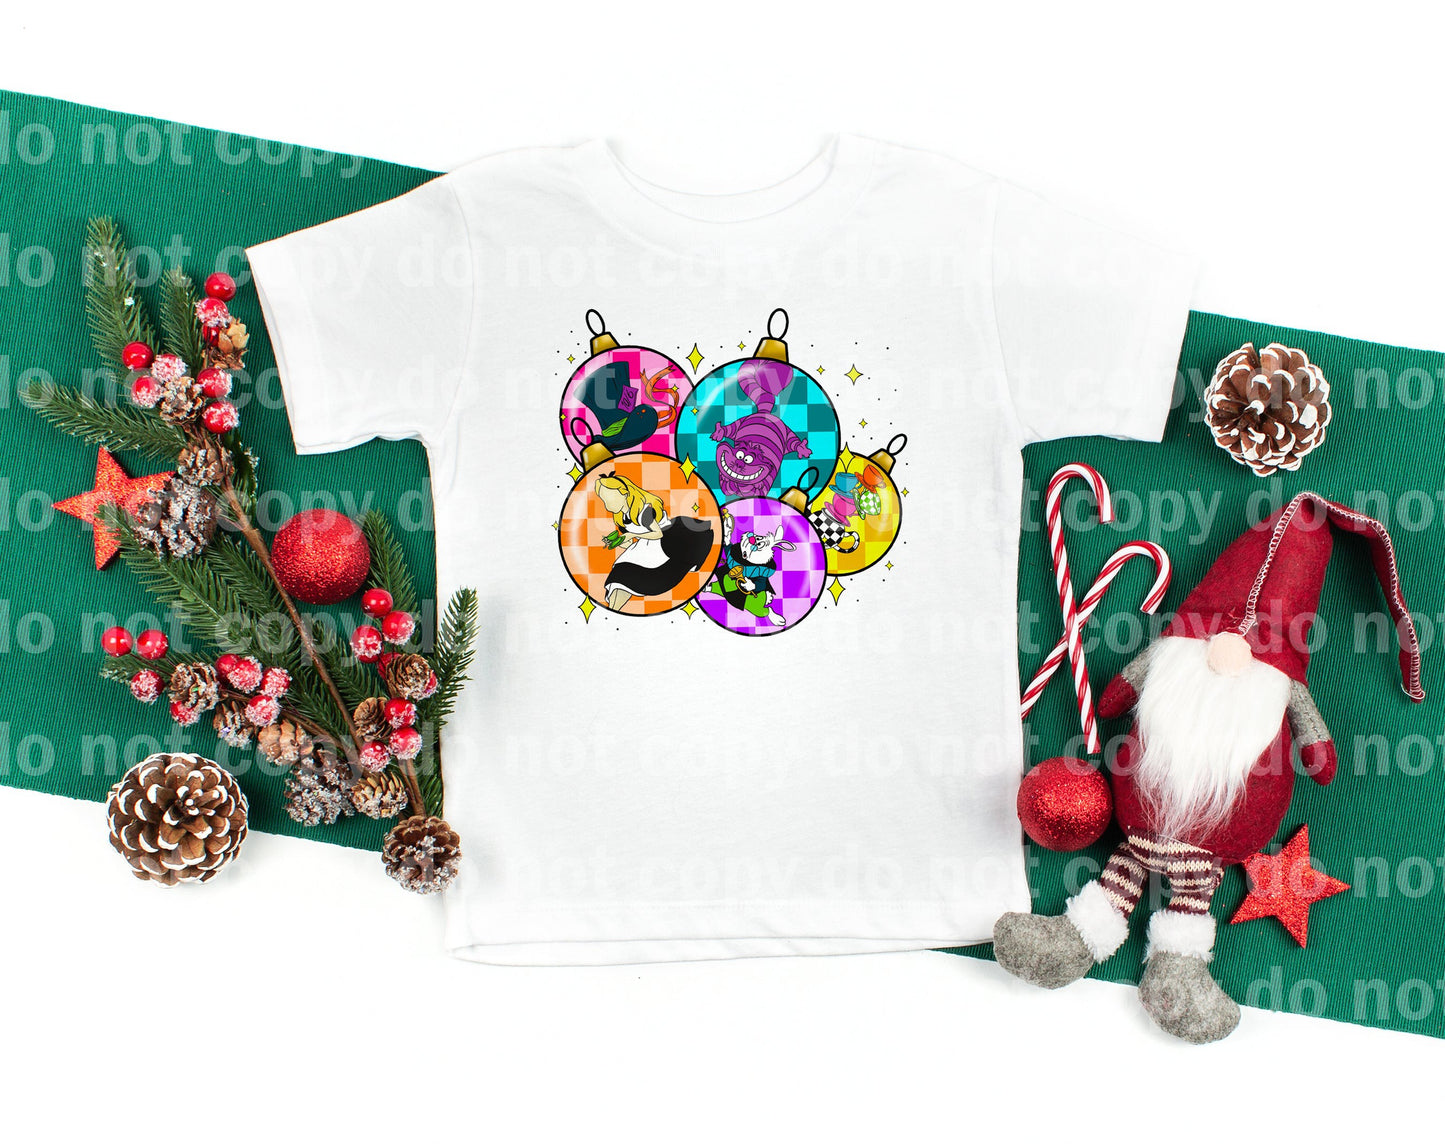 Alice Christmas Ornament Balls with Optional Sleeve Design Dream Print or Sublimation Print